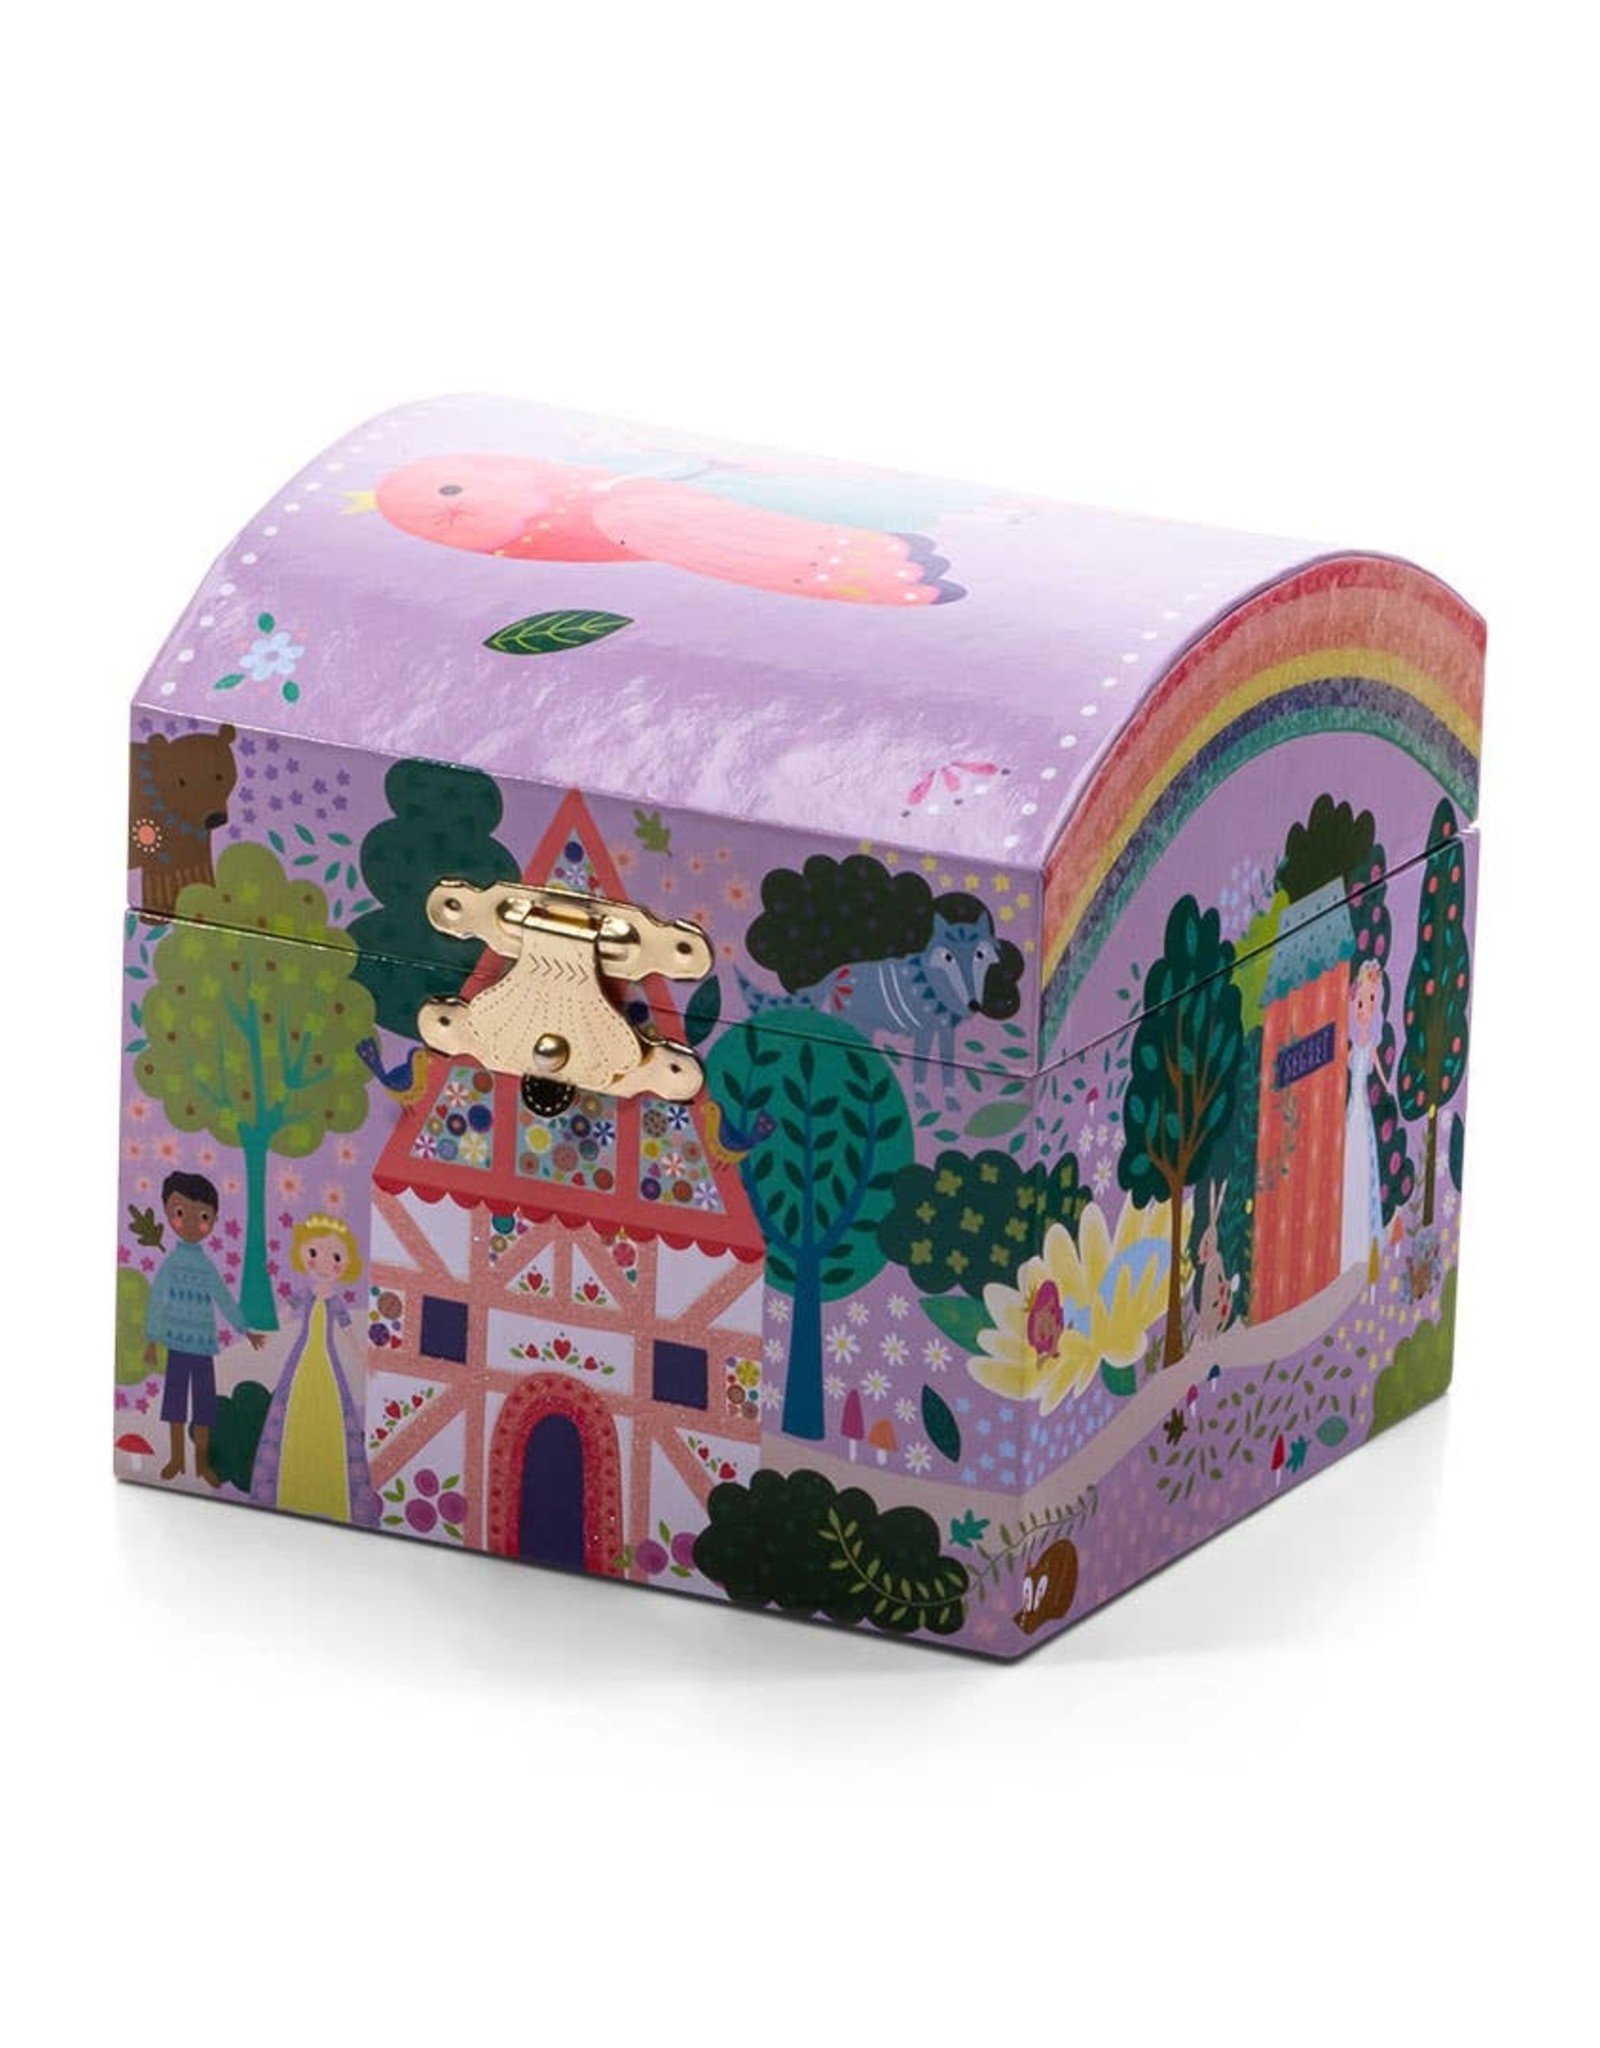 Floss and Rock Fairytale Small Dome Jewelry Box